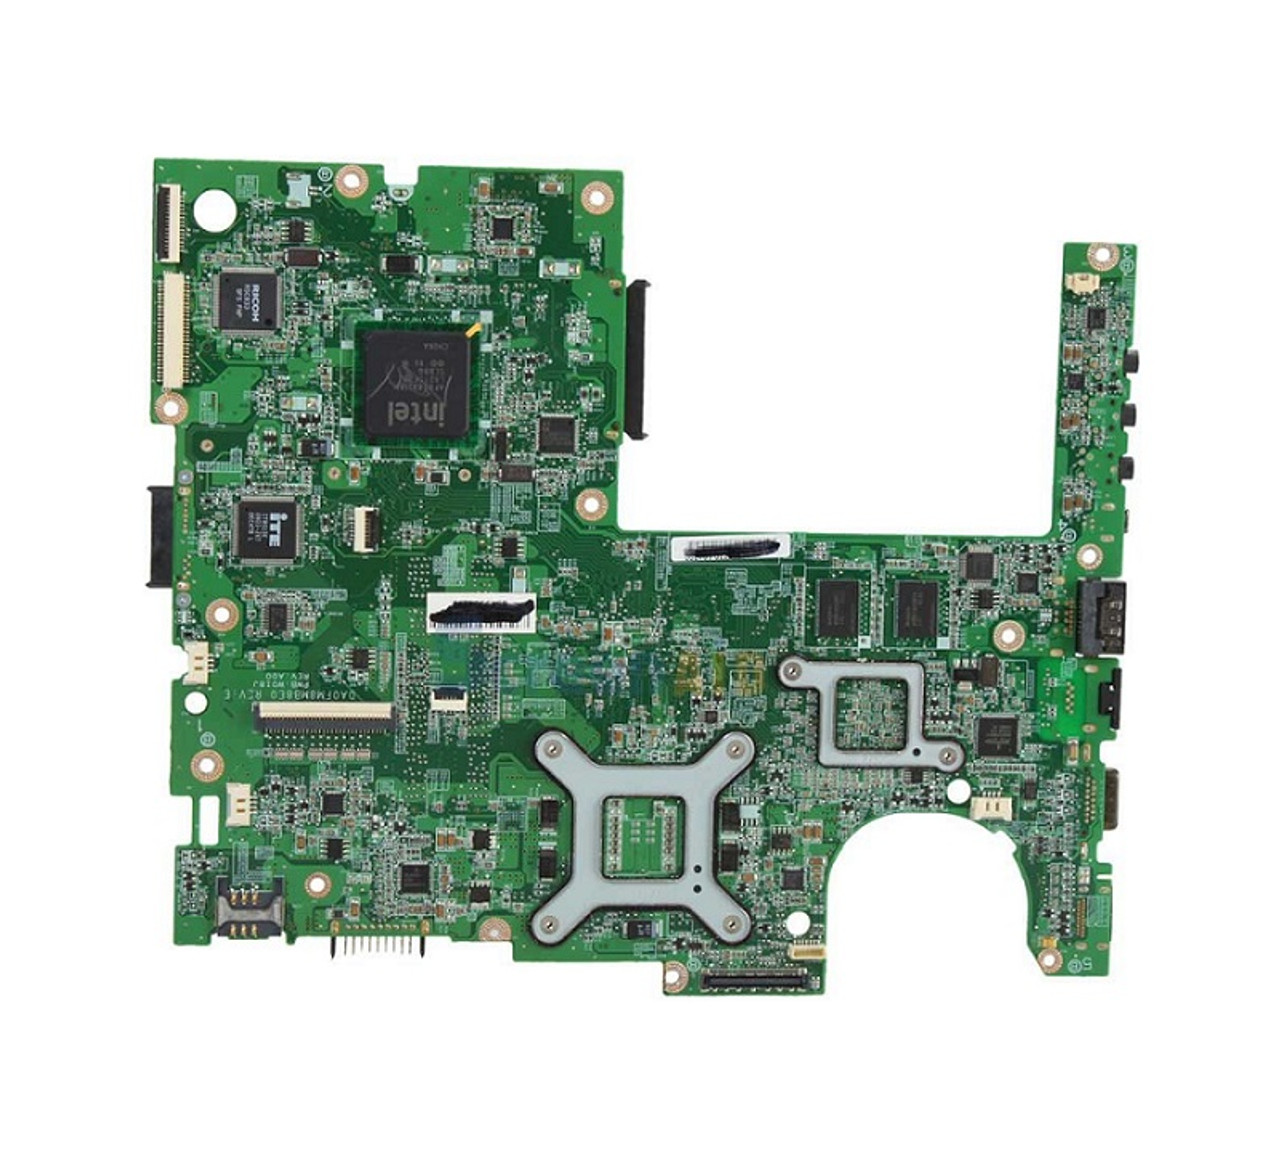 591413-001 - HP System Board (MotherBoard) for Dv3 Notebook PC (Refurbished)